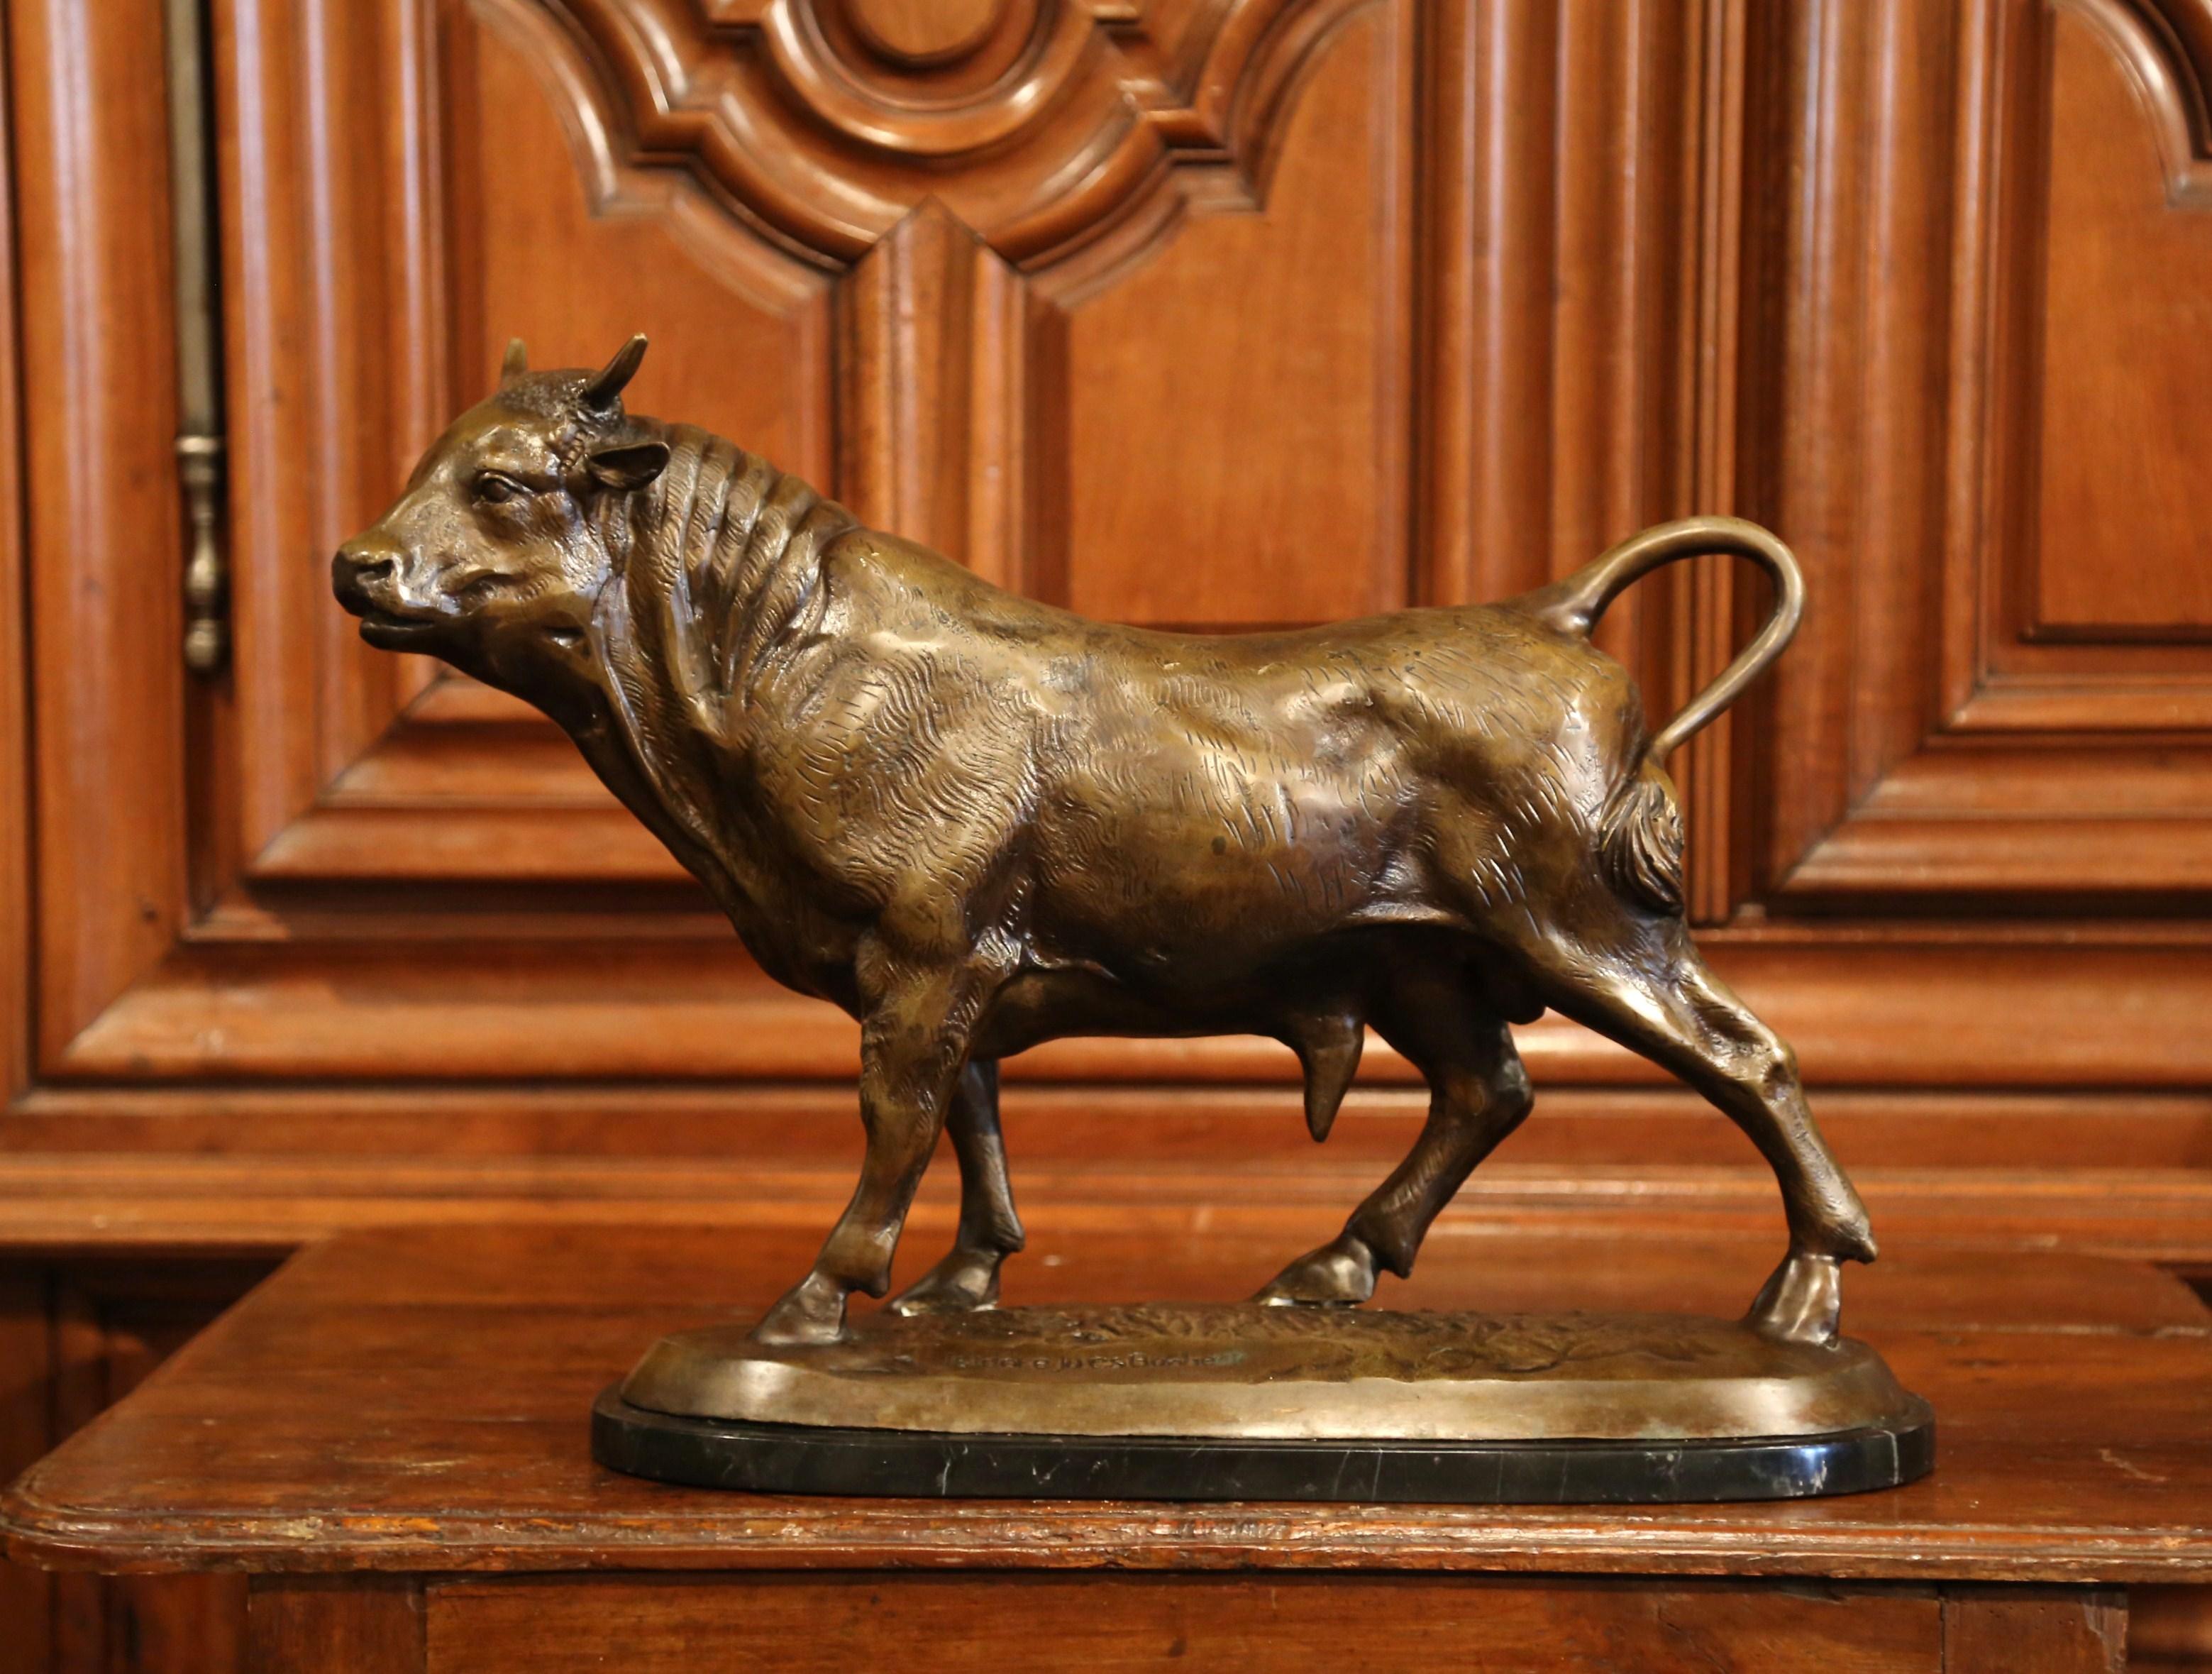 Hand-Crafted Early 20th Century French Bronze Bull Sculpture on Marble Signed Isidore Bonheur